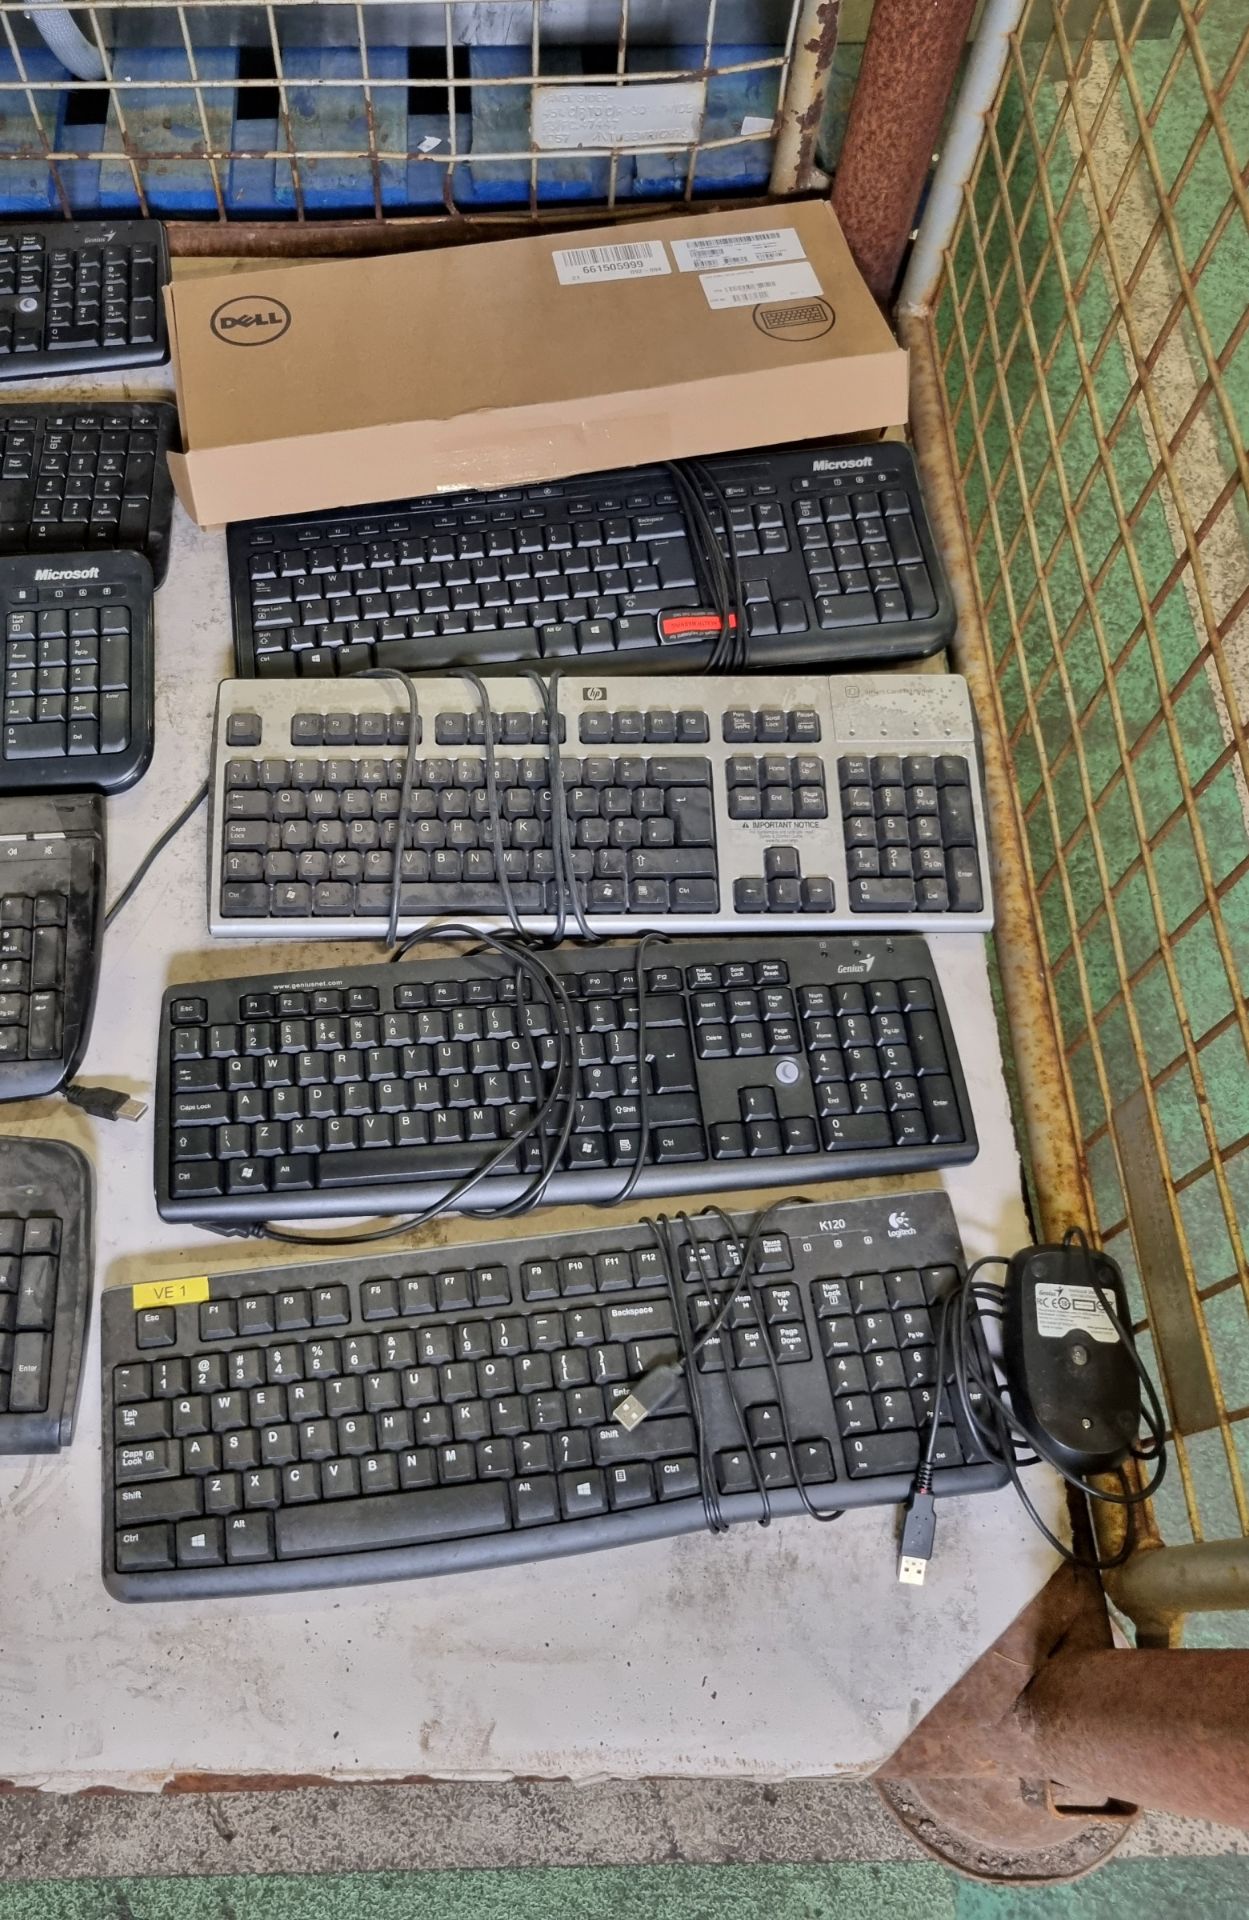 10x wired and wireless keyboards - 13x wired mice - Image 3 of 5